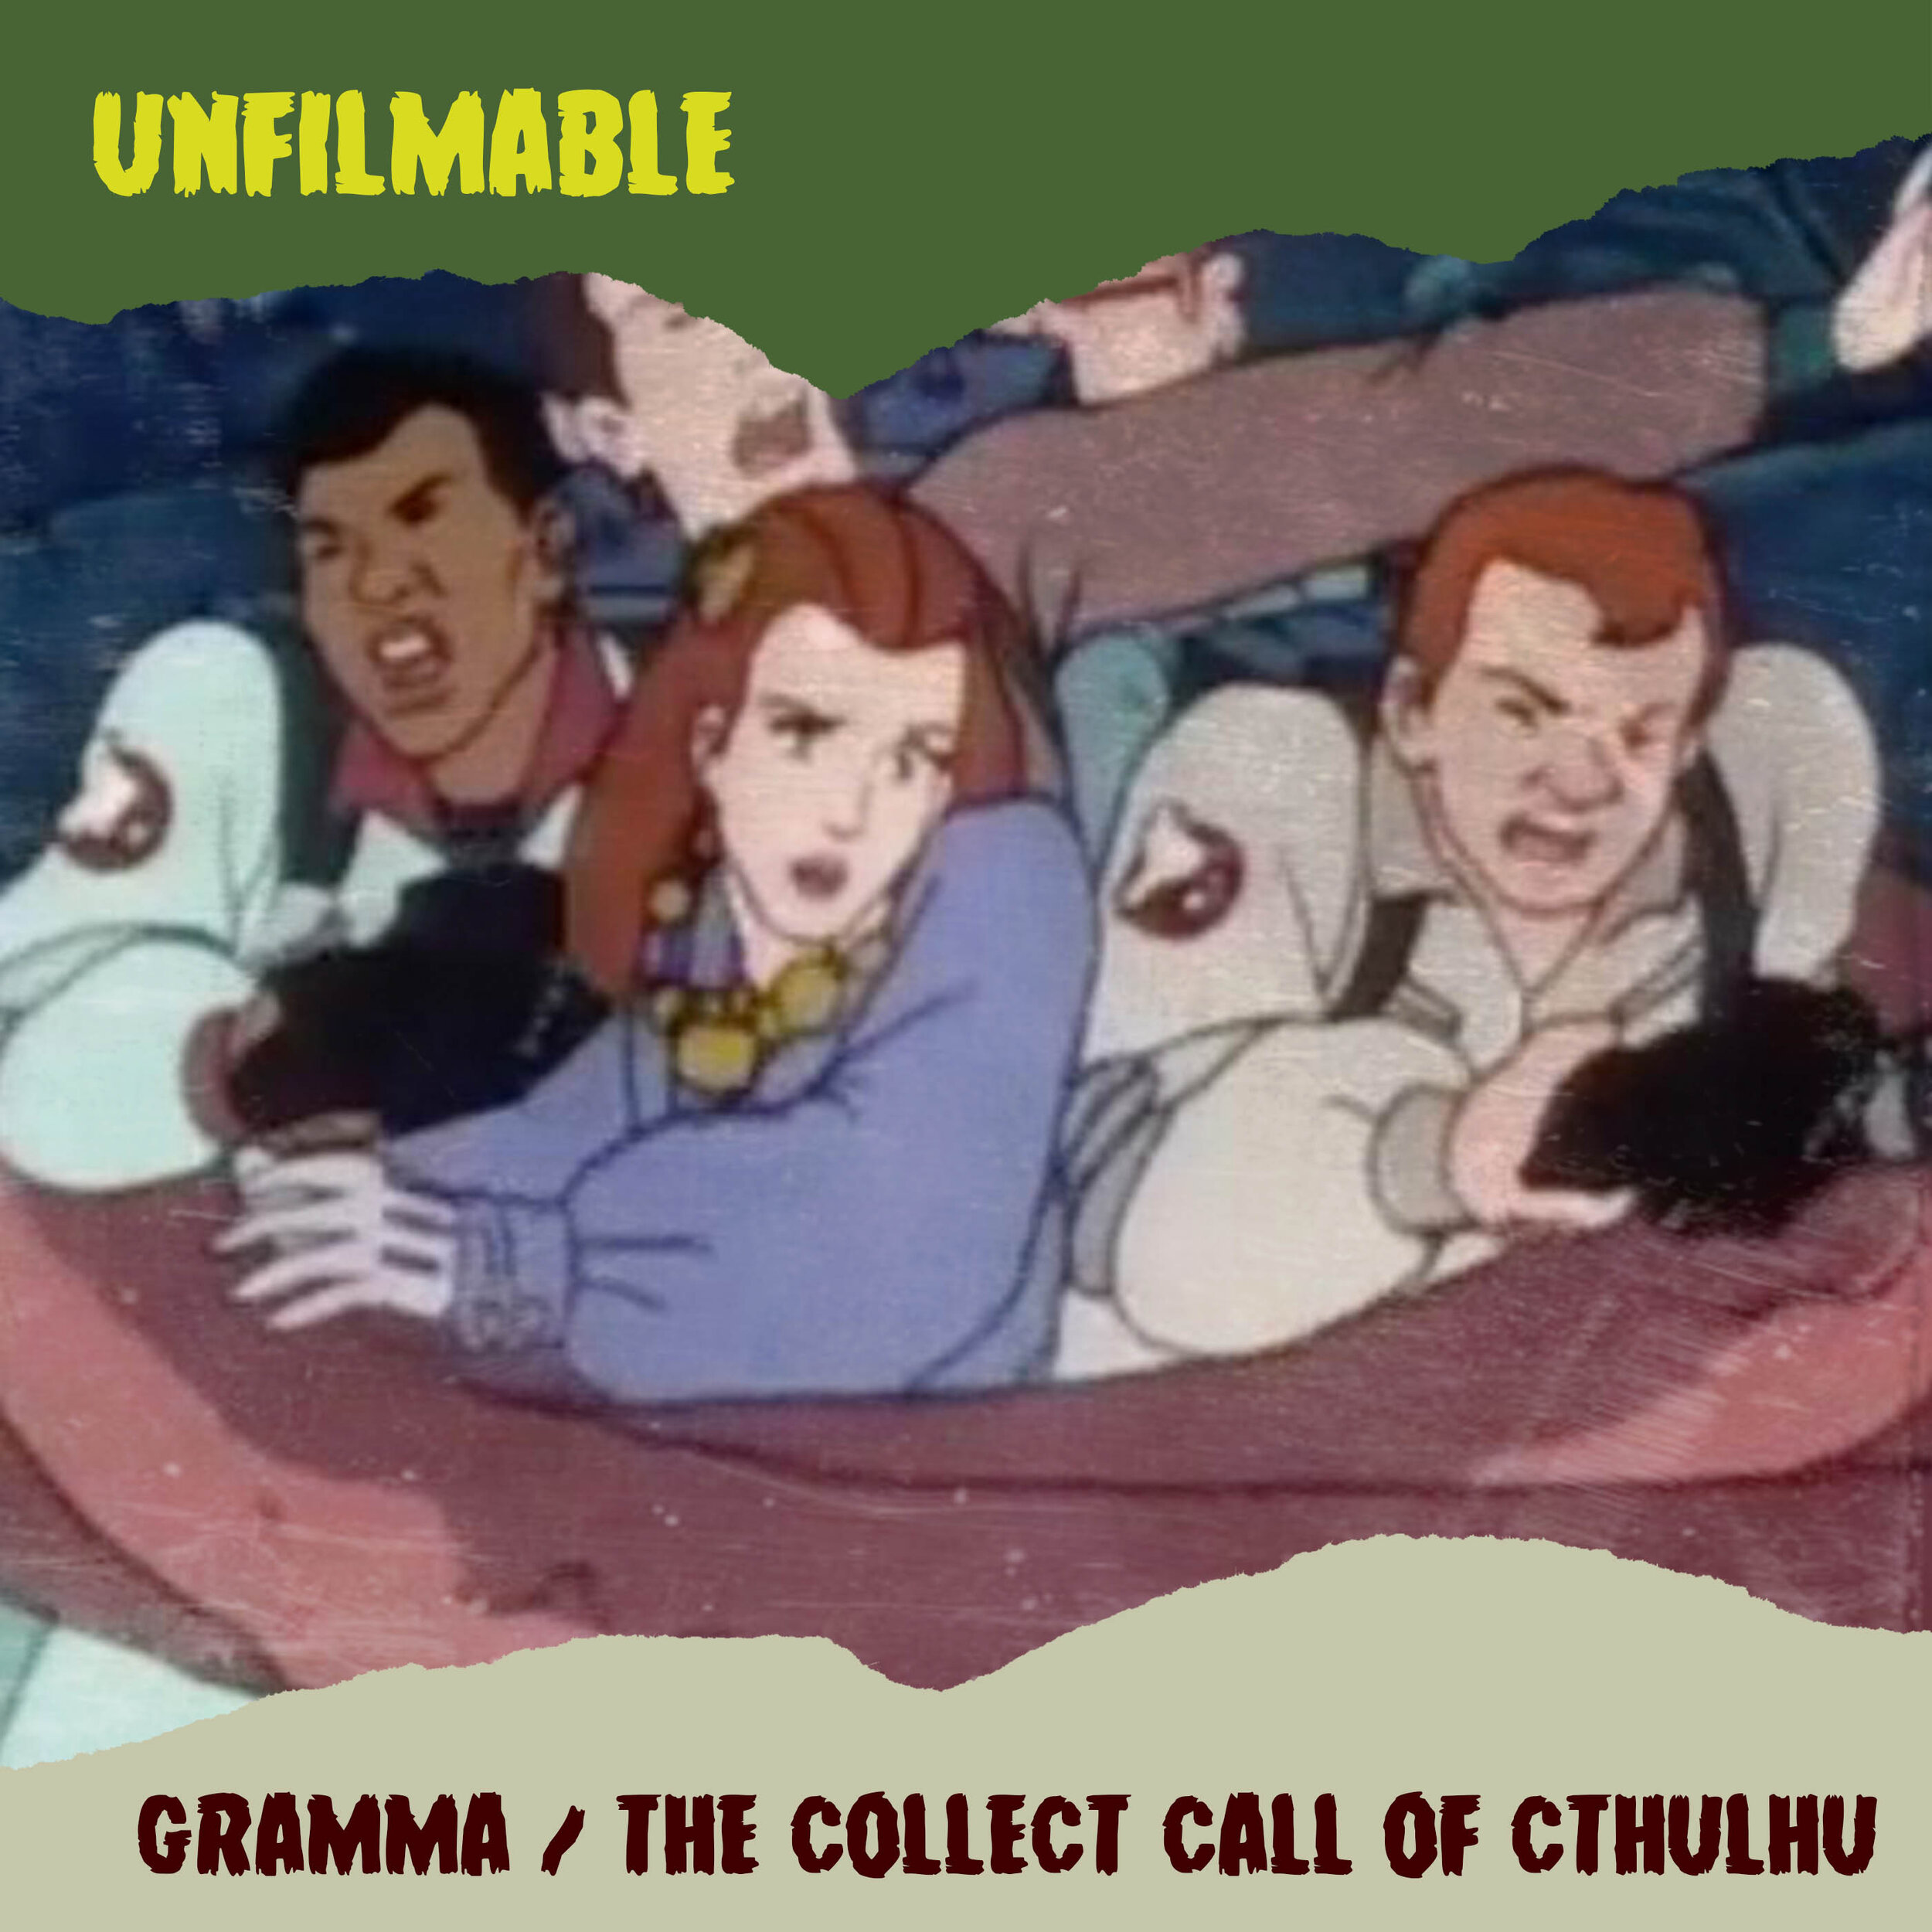 Gramma / The Collect Call of Cthulhu